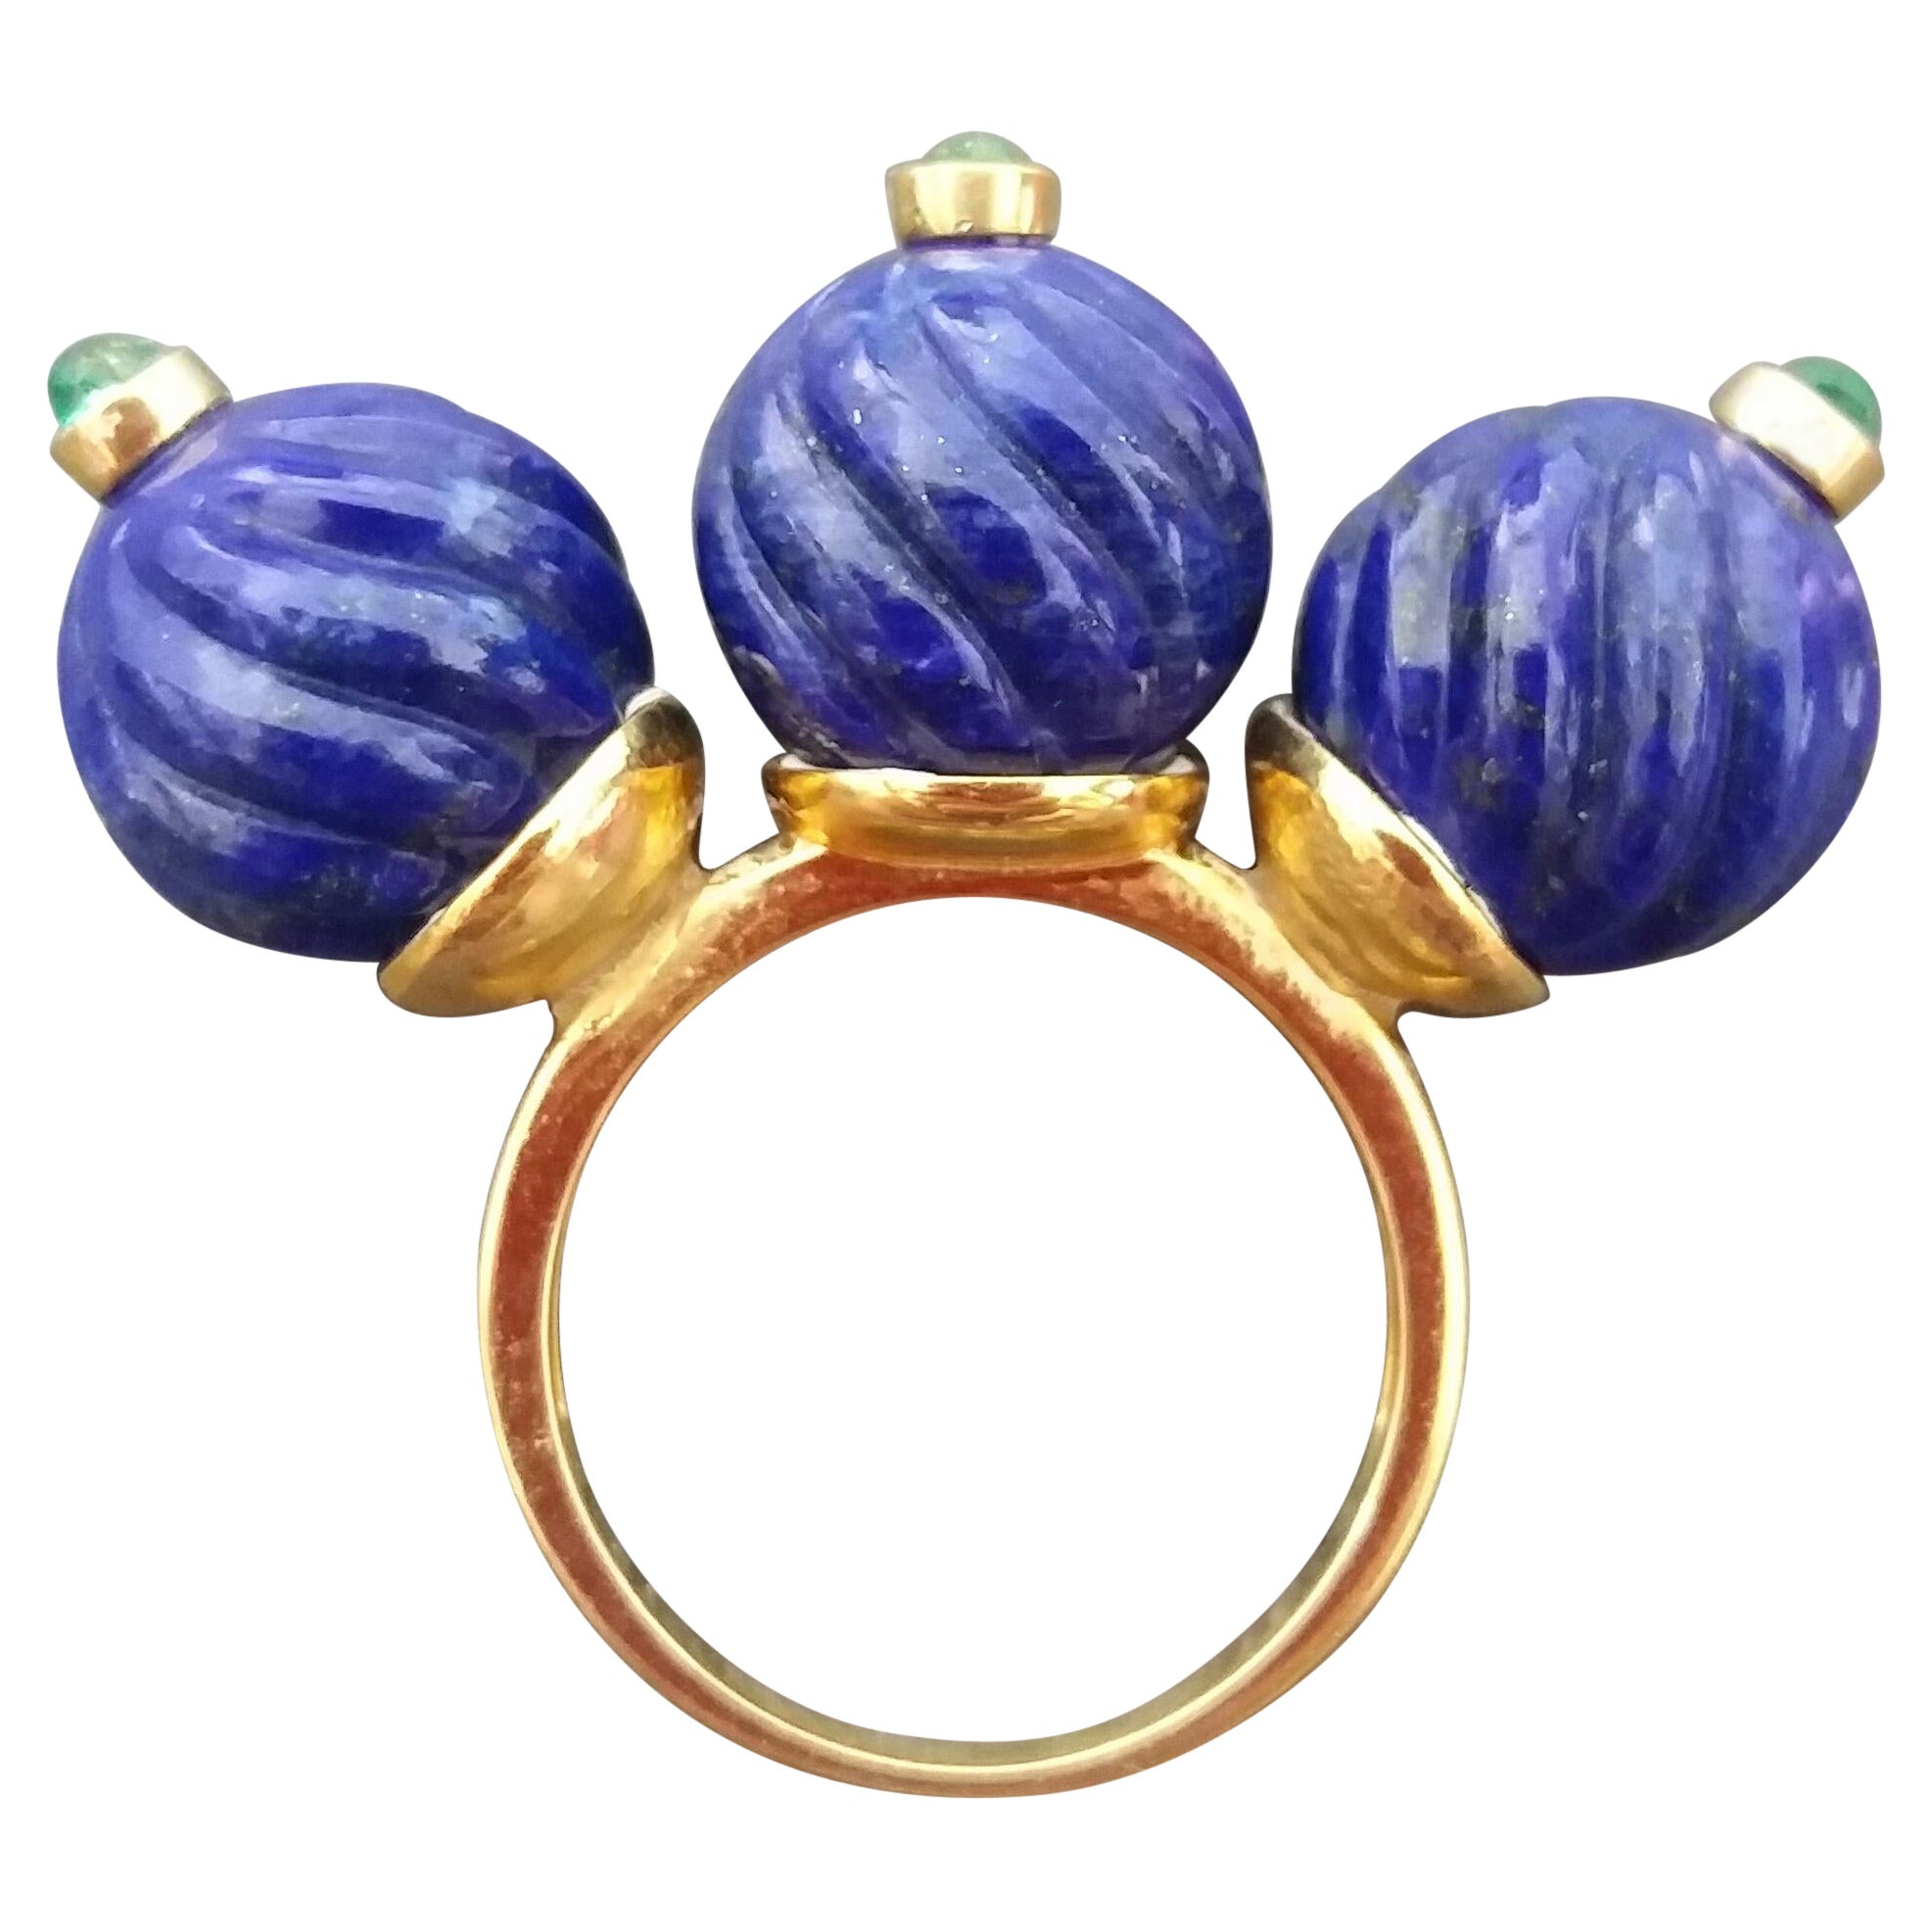 Three Carved Lapis Lazuli Beads Emerald Round Cabs 14K Yellow Gold Cocktail Ring